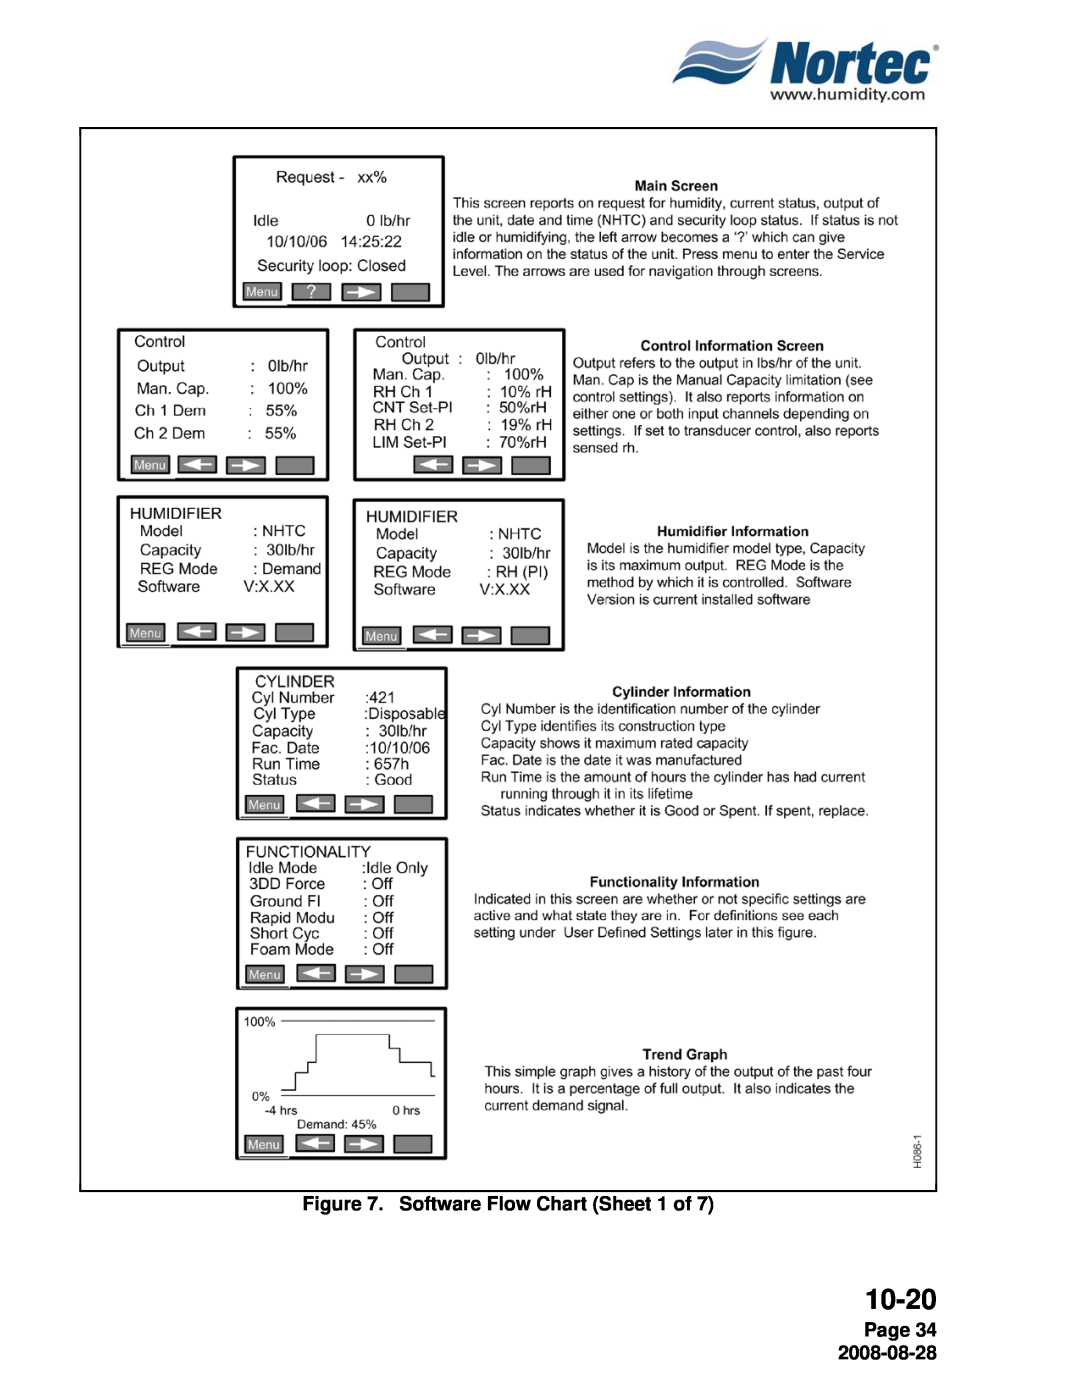 Nortec NH Series installation manual Software Flow Chart Sheet 1 of, Page 34, 10-20 